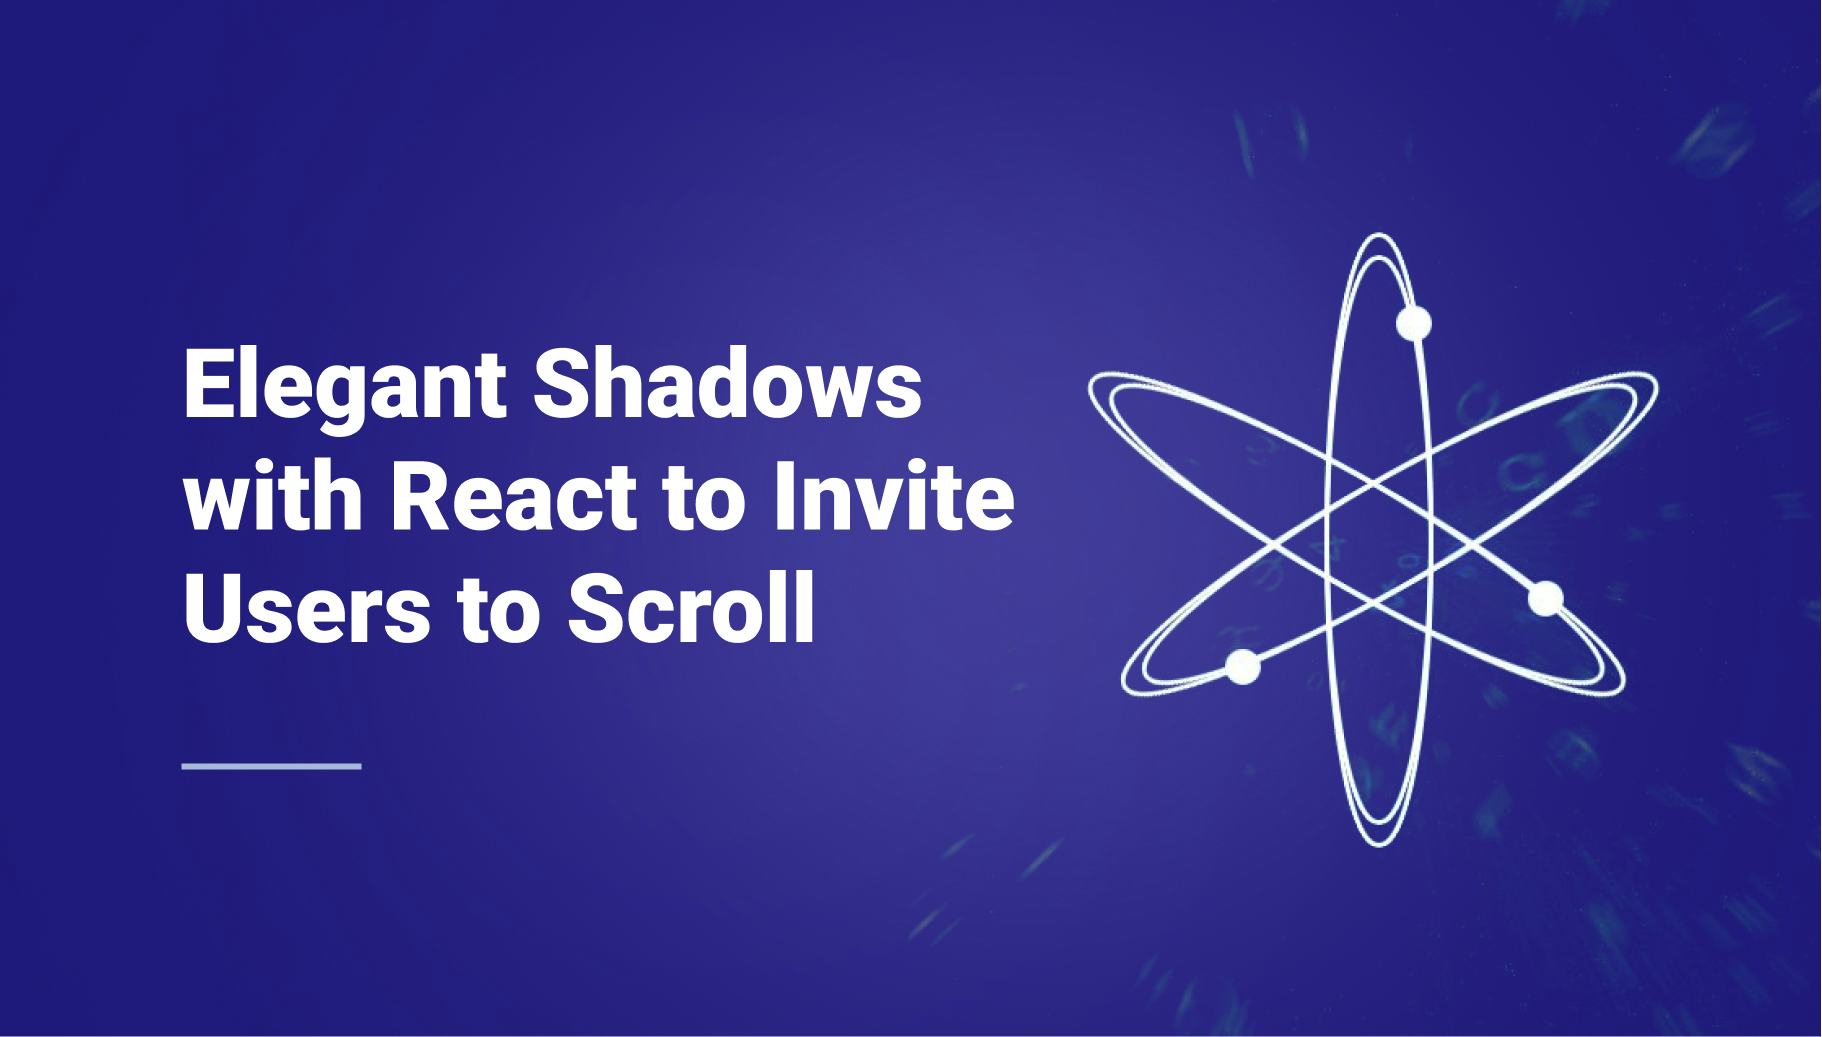 Adding Elegant Shadows with React to Invite Users to Scroll - Qovery